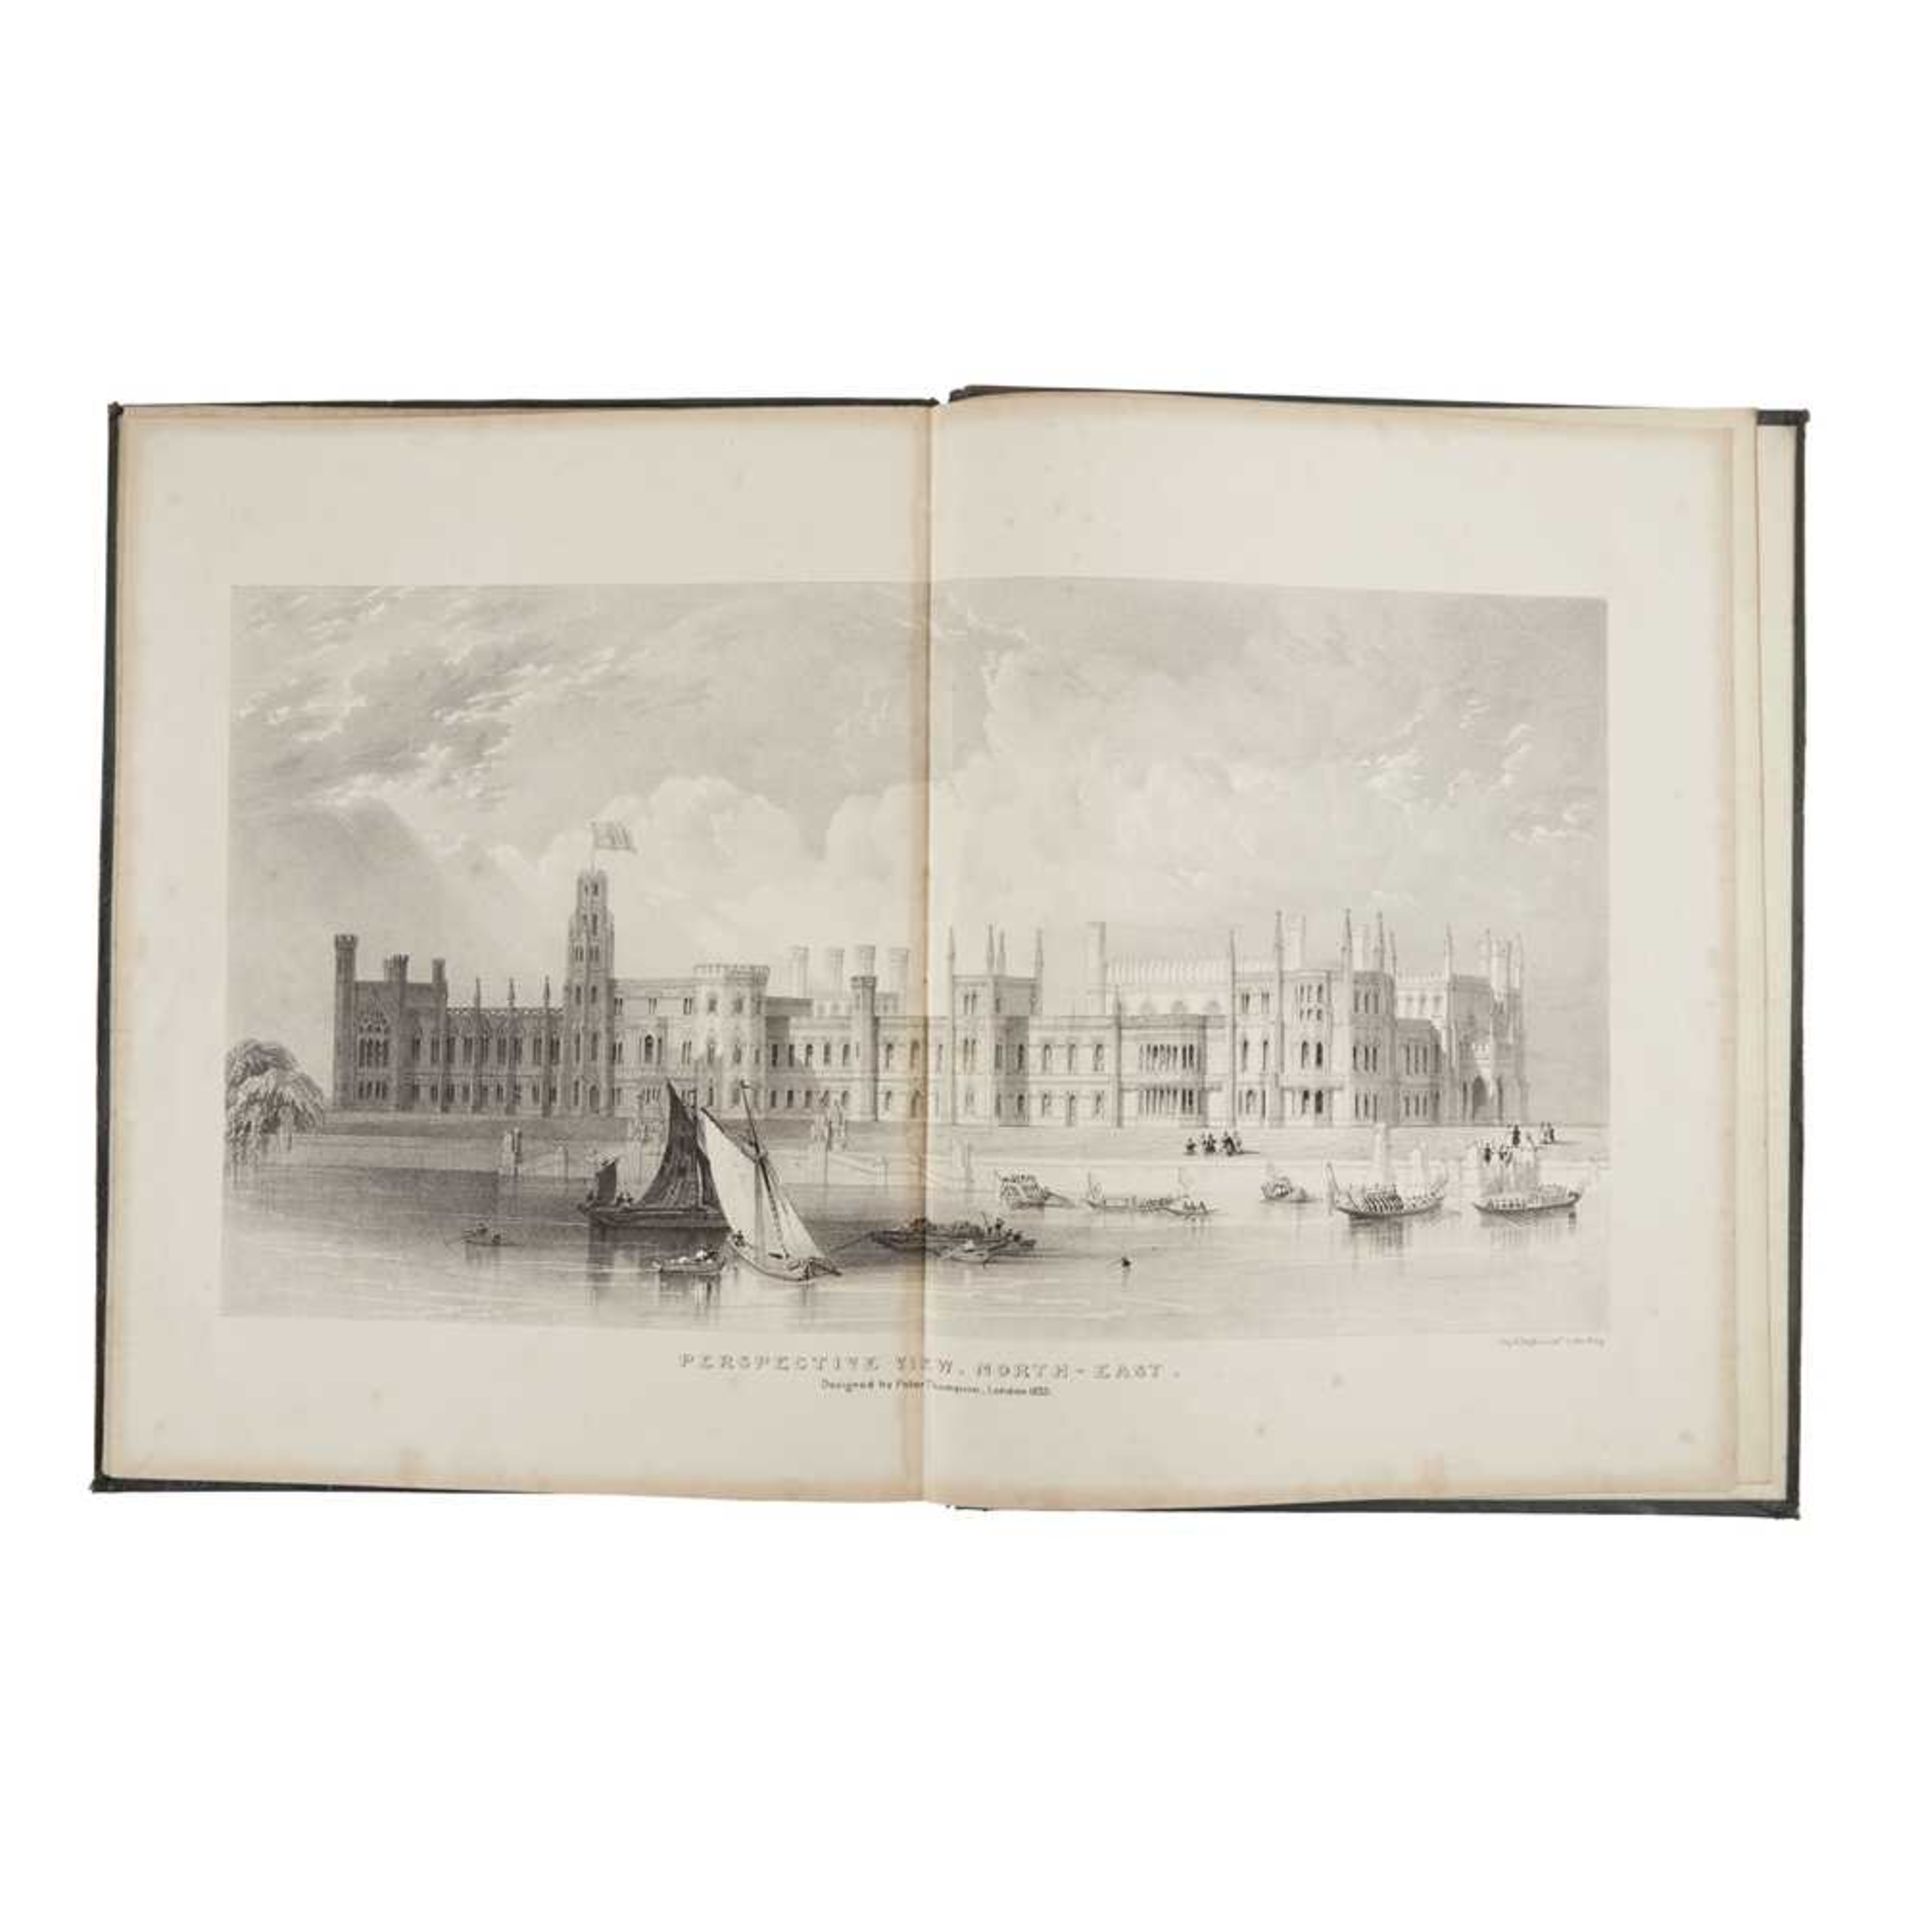 Thompson, Peter Designs for the proposed New Houses of Parliament London: Peter Thompson, 1836. 4to,